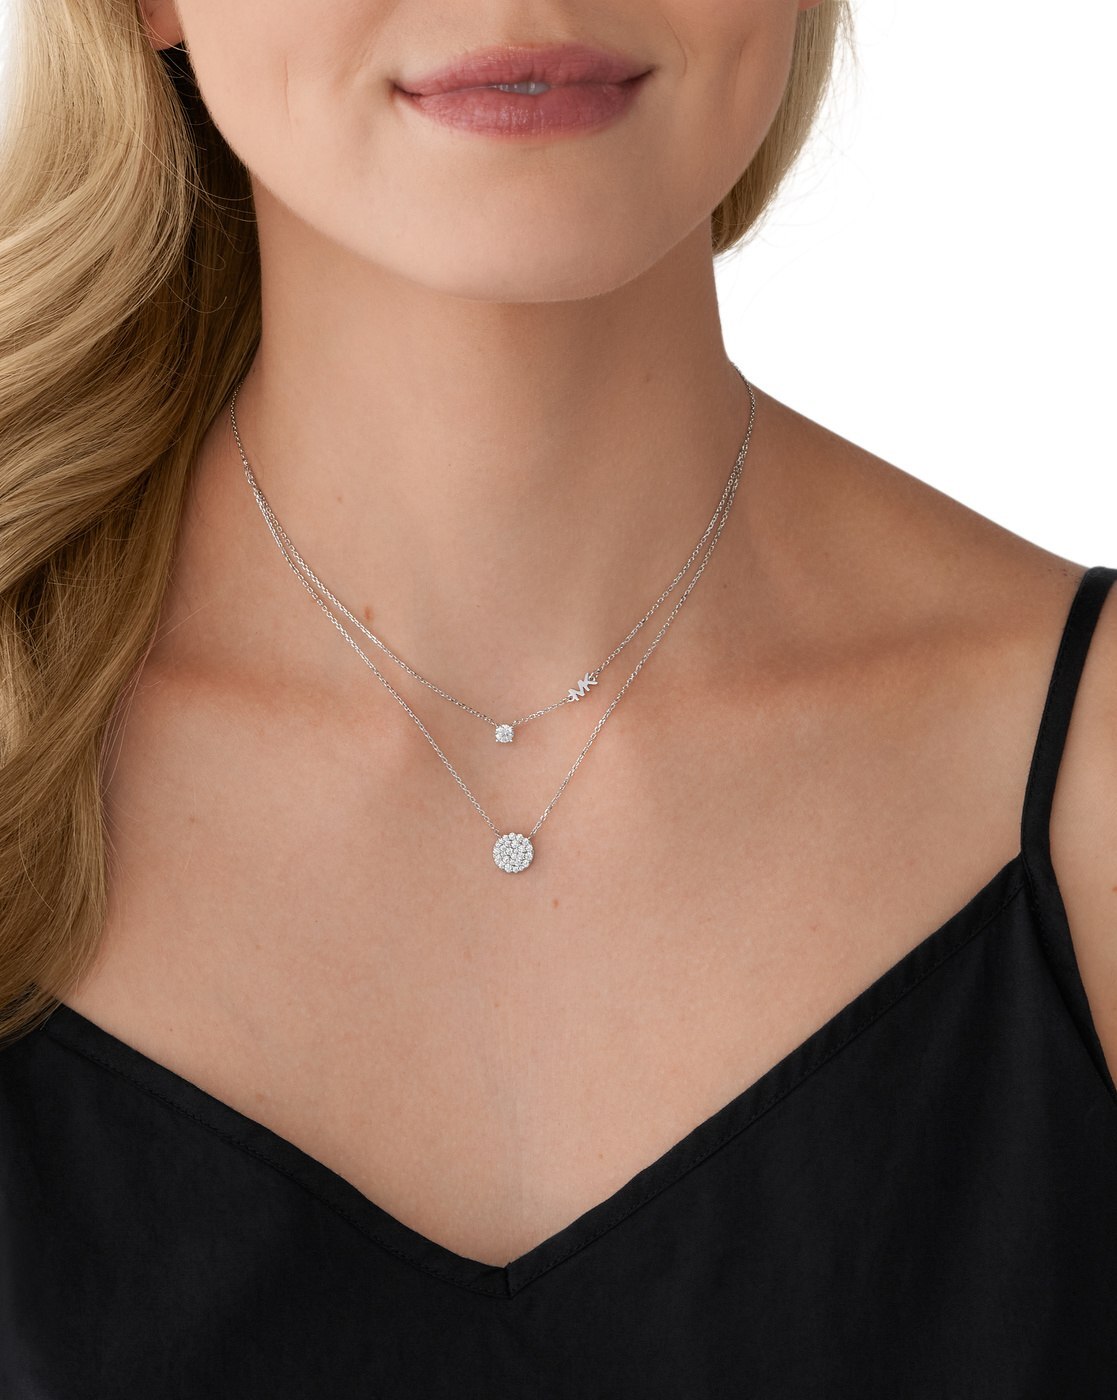 Buy Michael Kors Silver-Toned Stone-Studded Layered Necklace